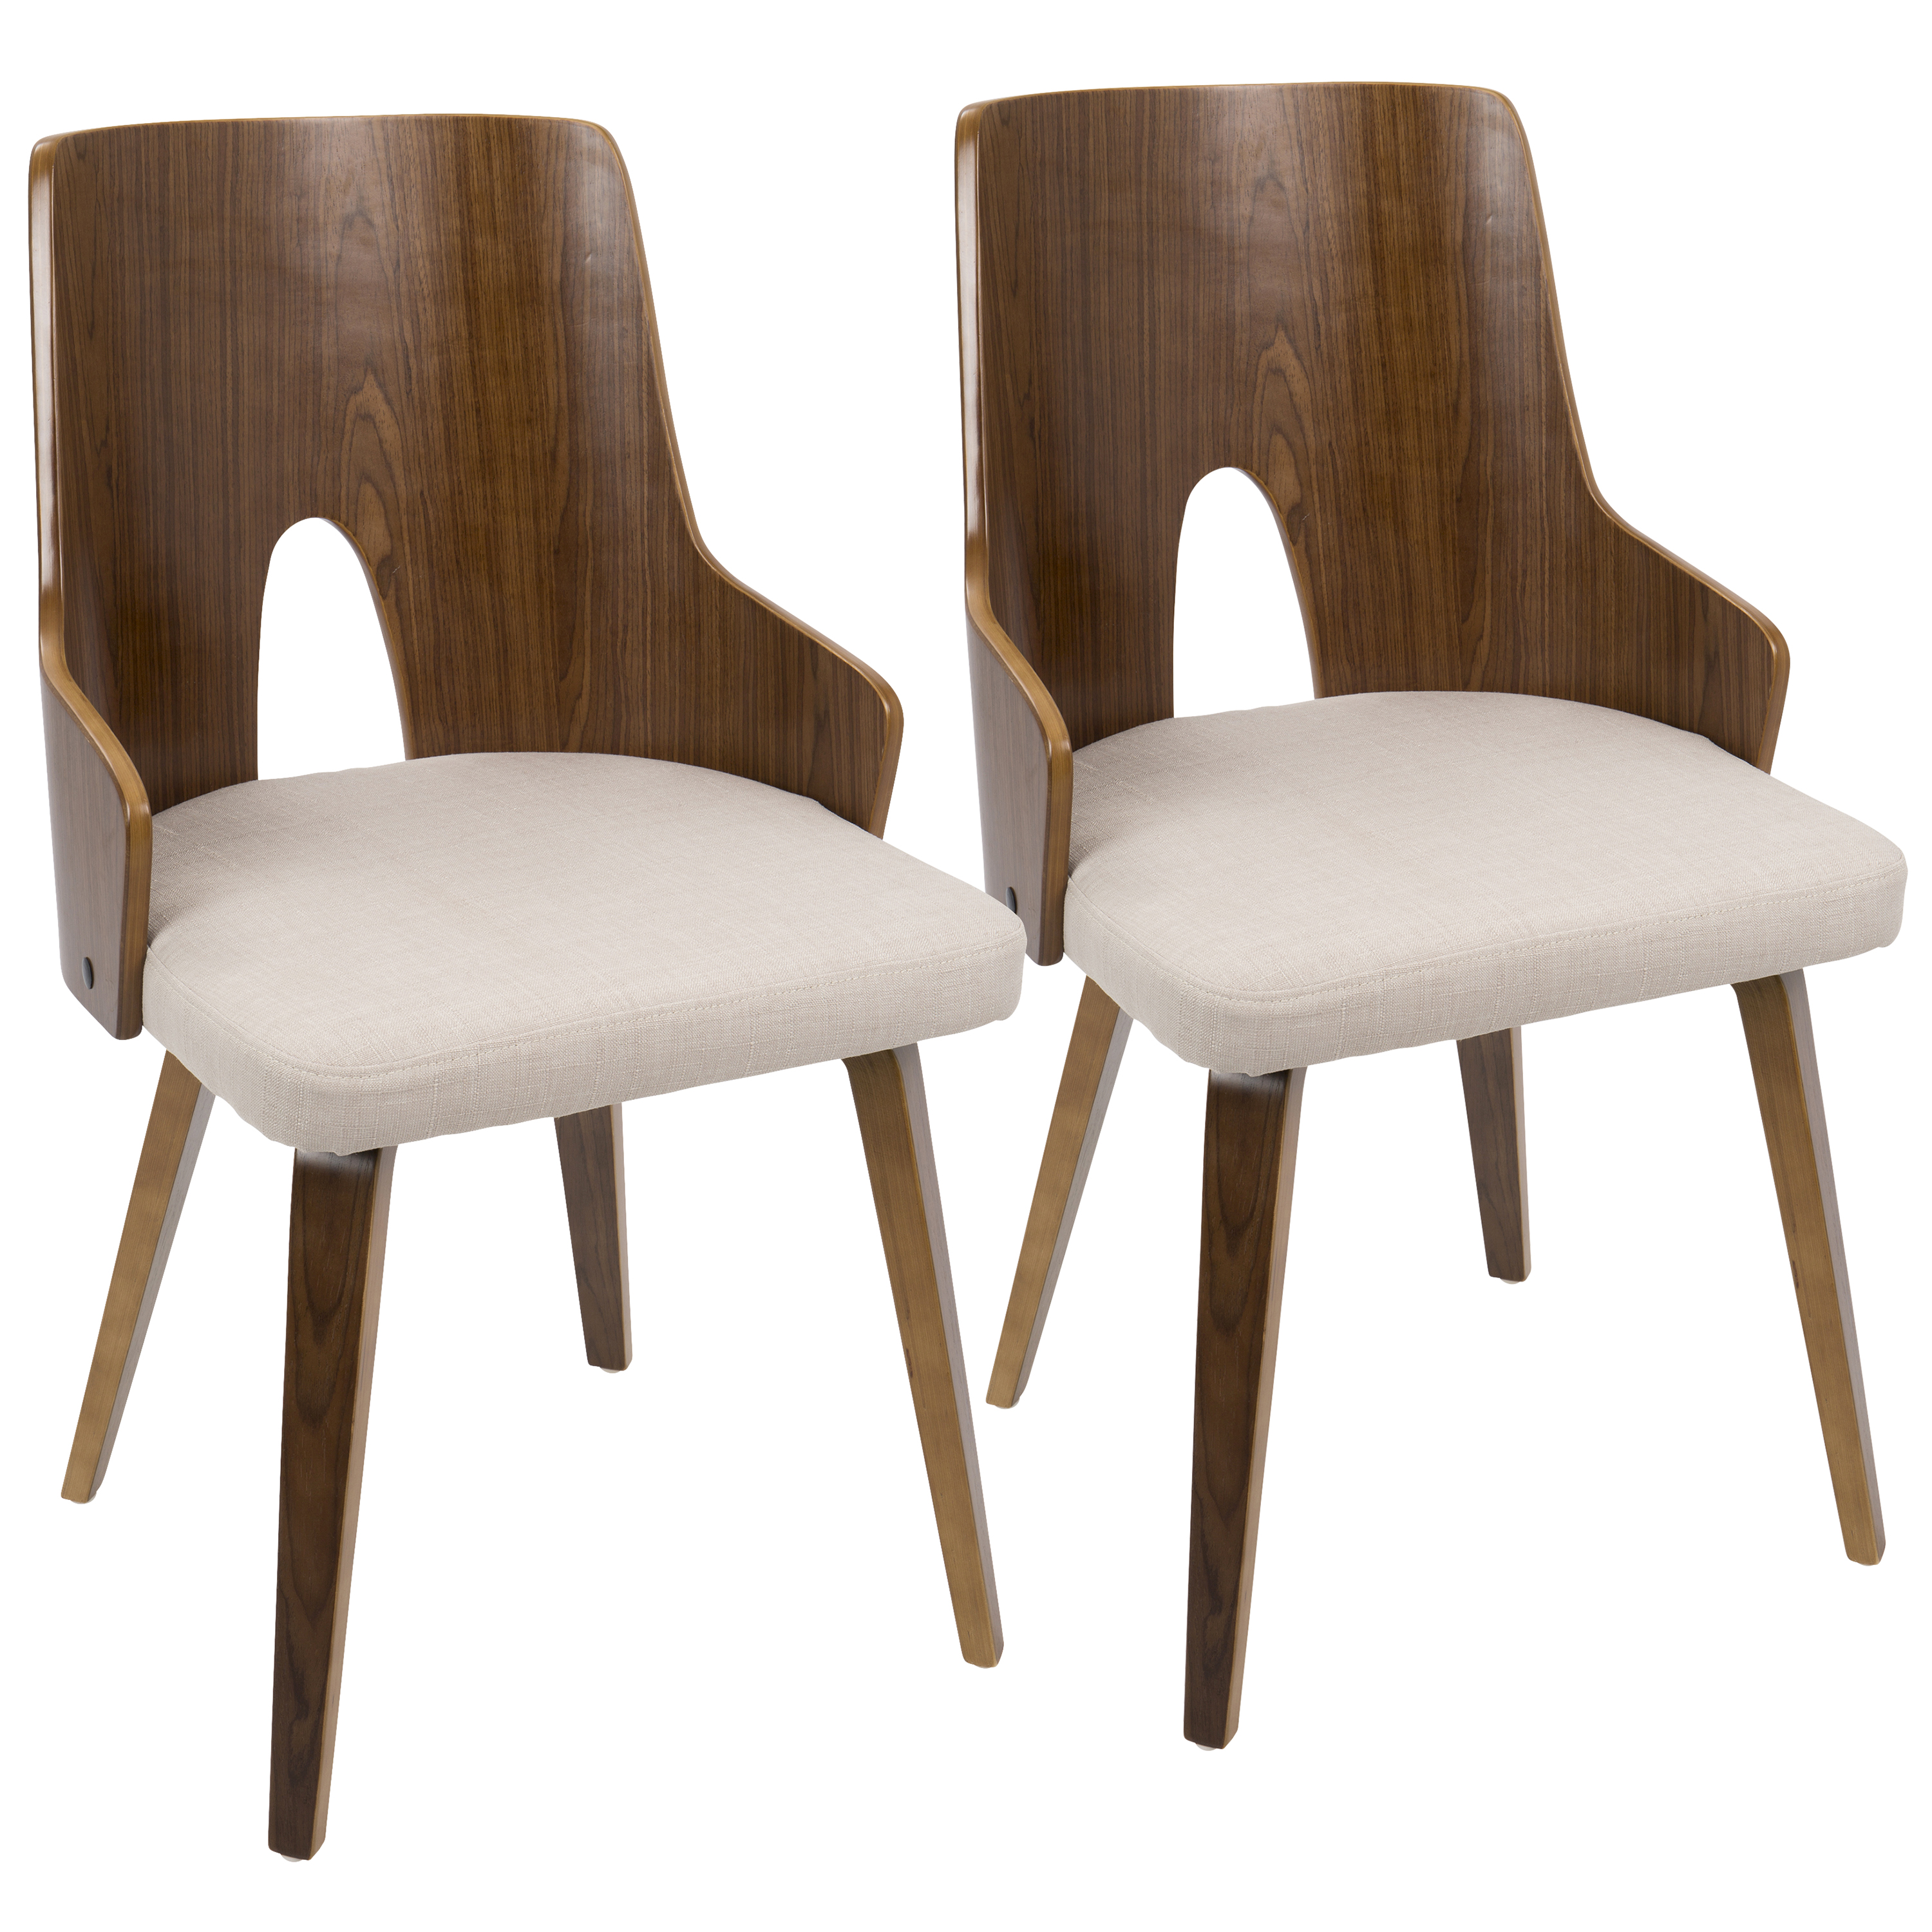 UPC 681144440688 product image for Lumisource Ariana Mid-Century Modern Chair-Set of 2, Brown/Blue | upcitemdb.com